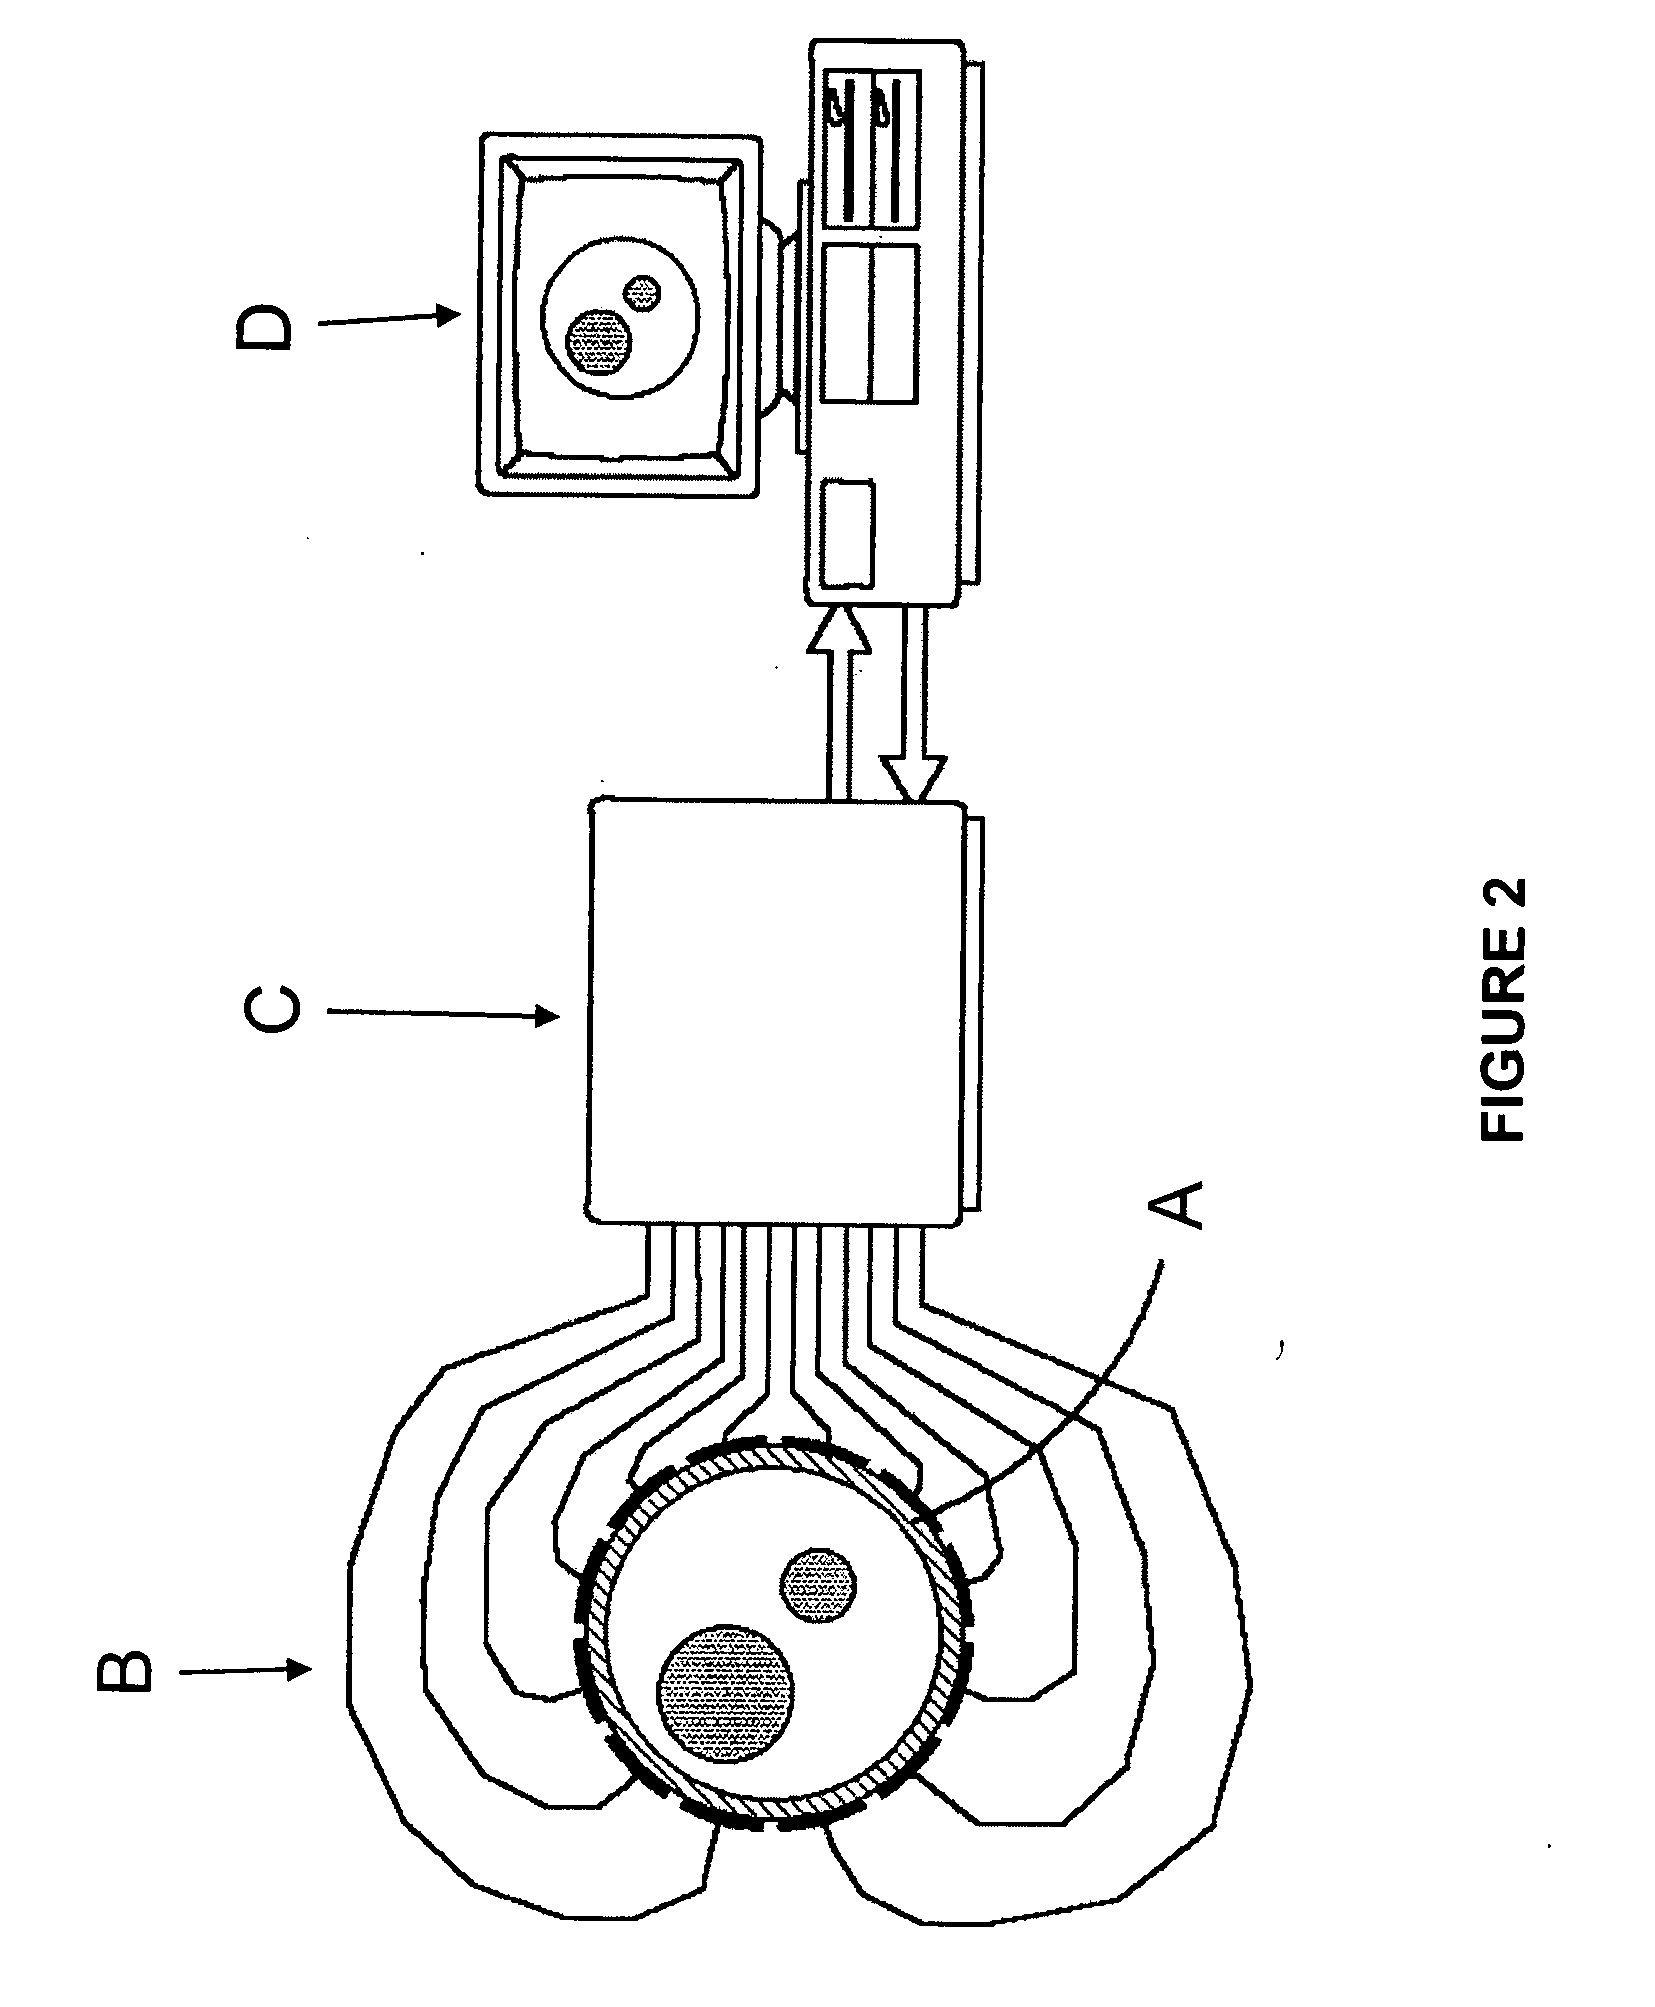 Method for imaging multiphase flow using electrical capacitance tomography